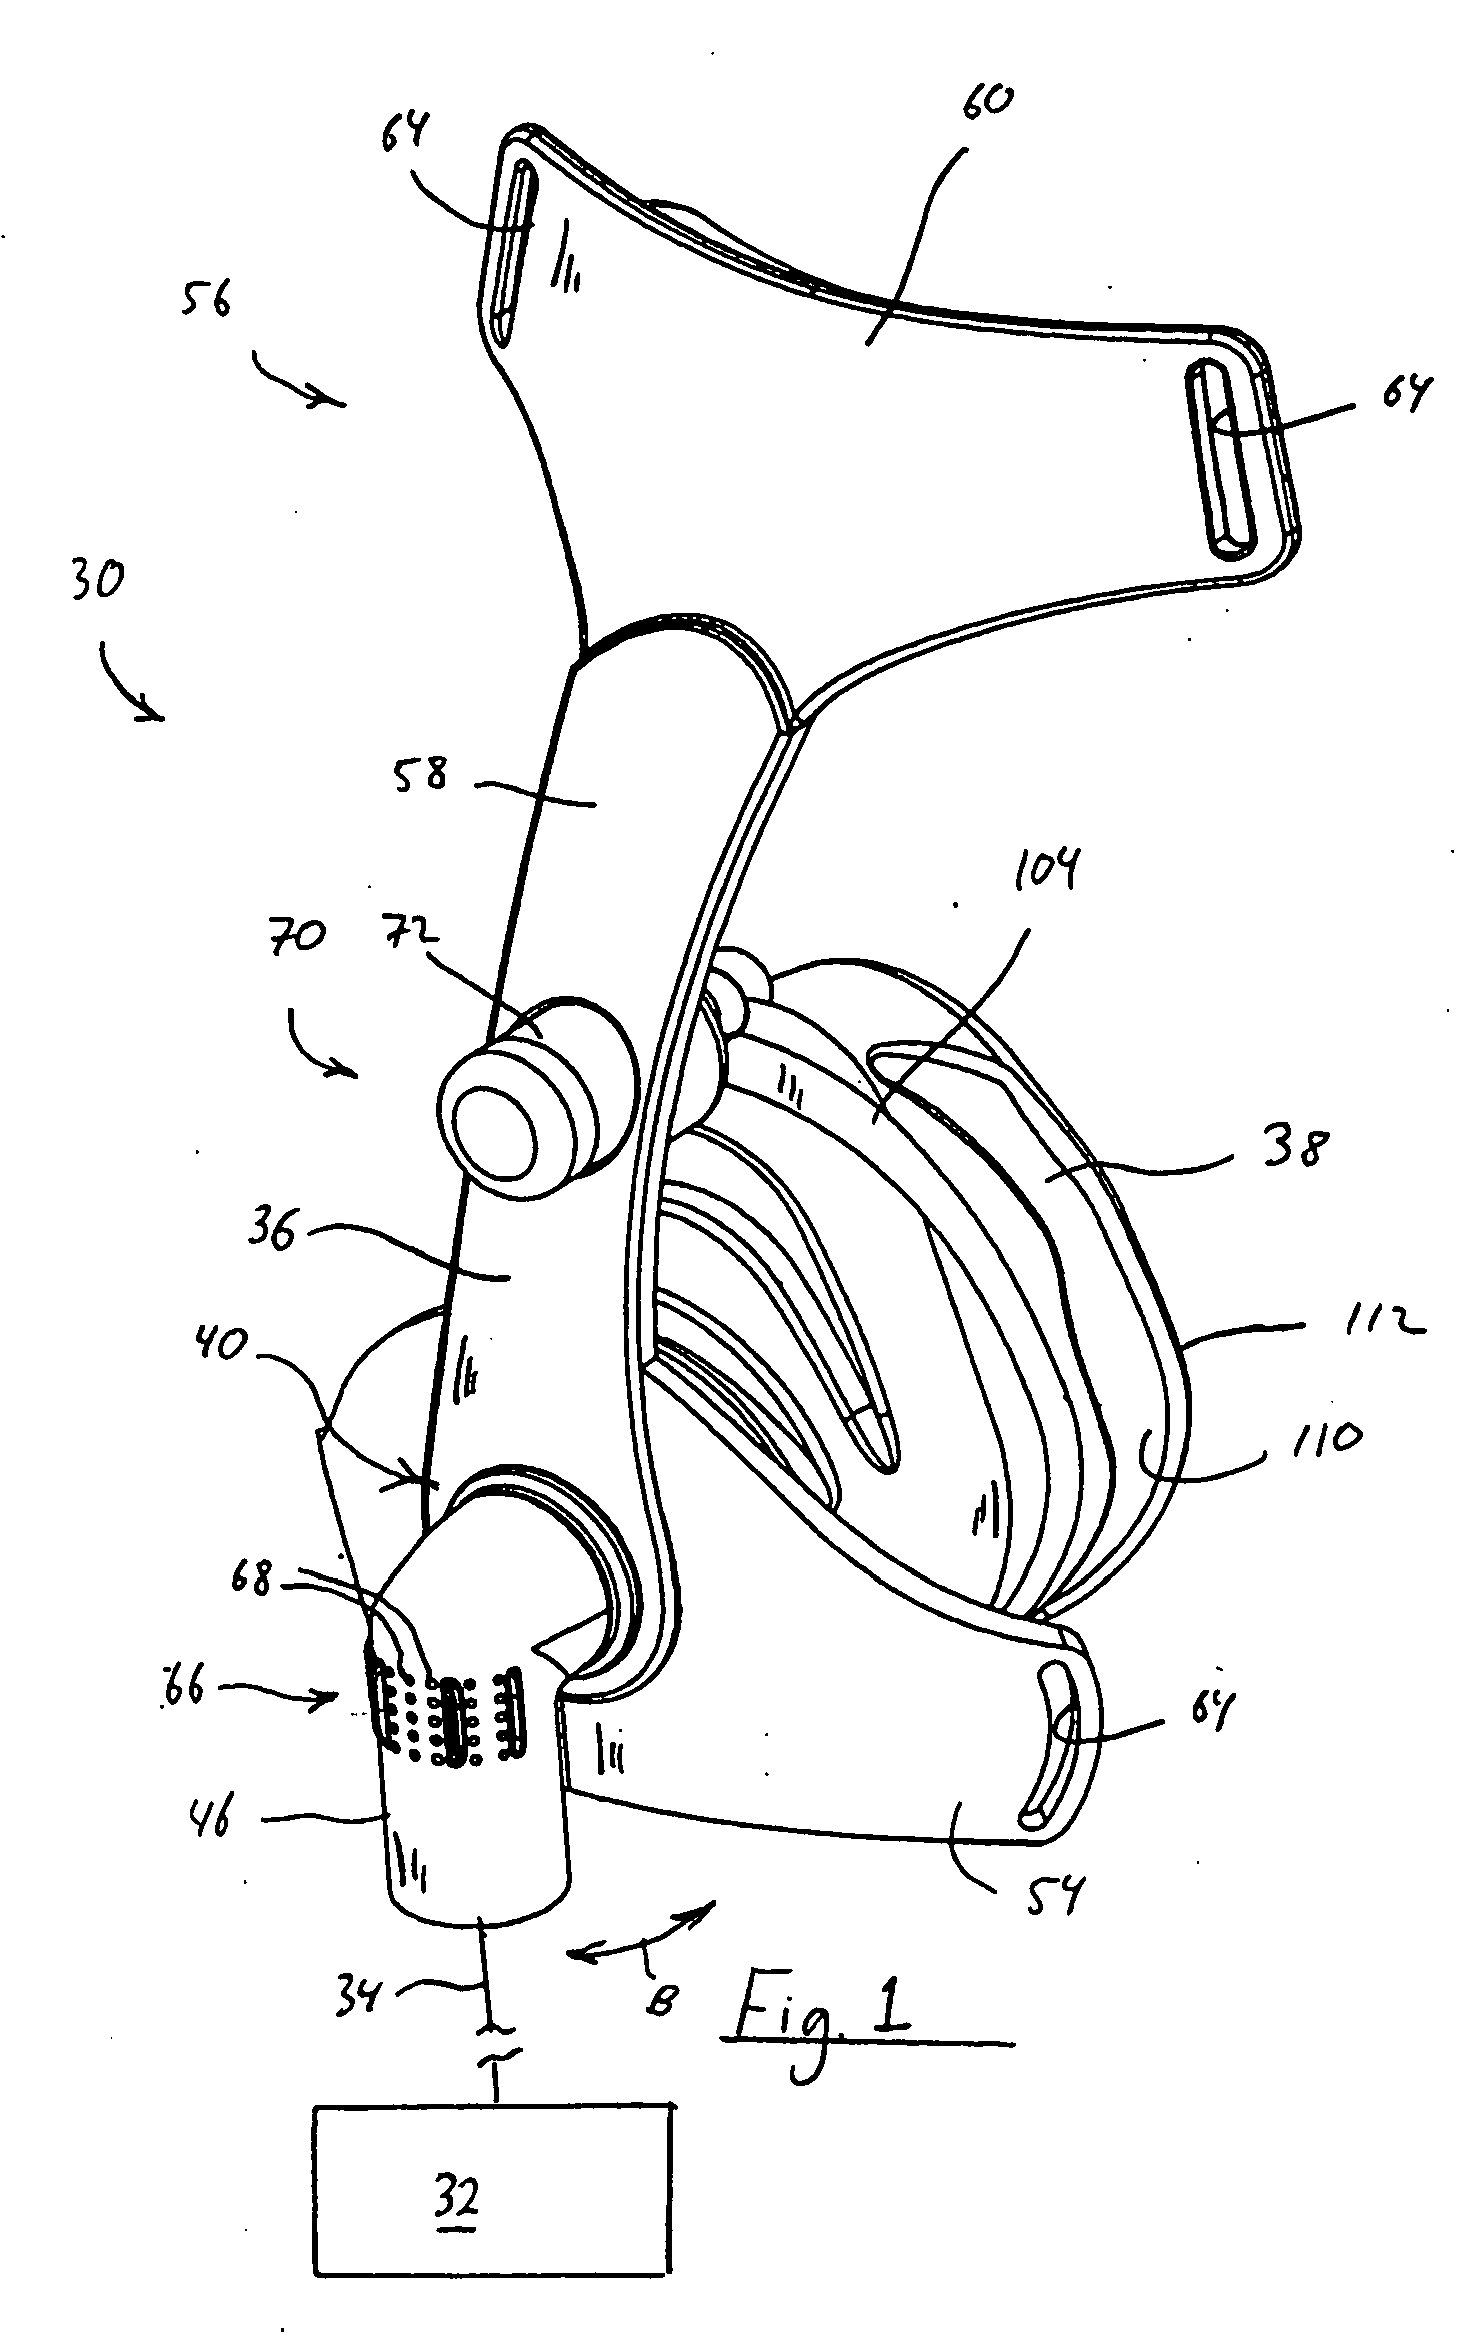 Patient interface with adjustable cushion